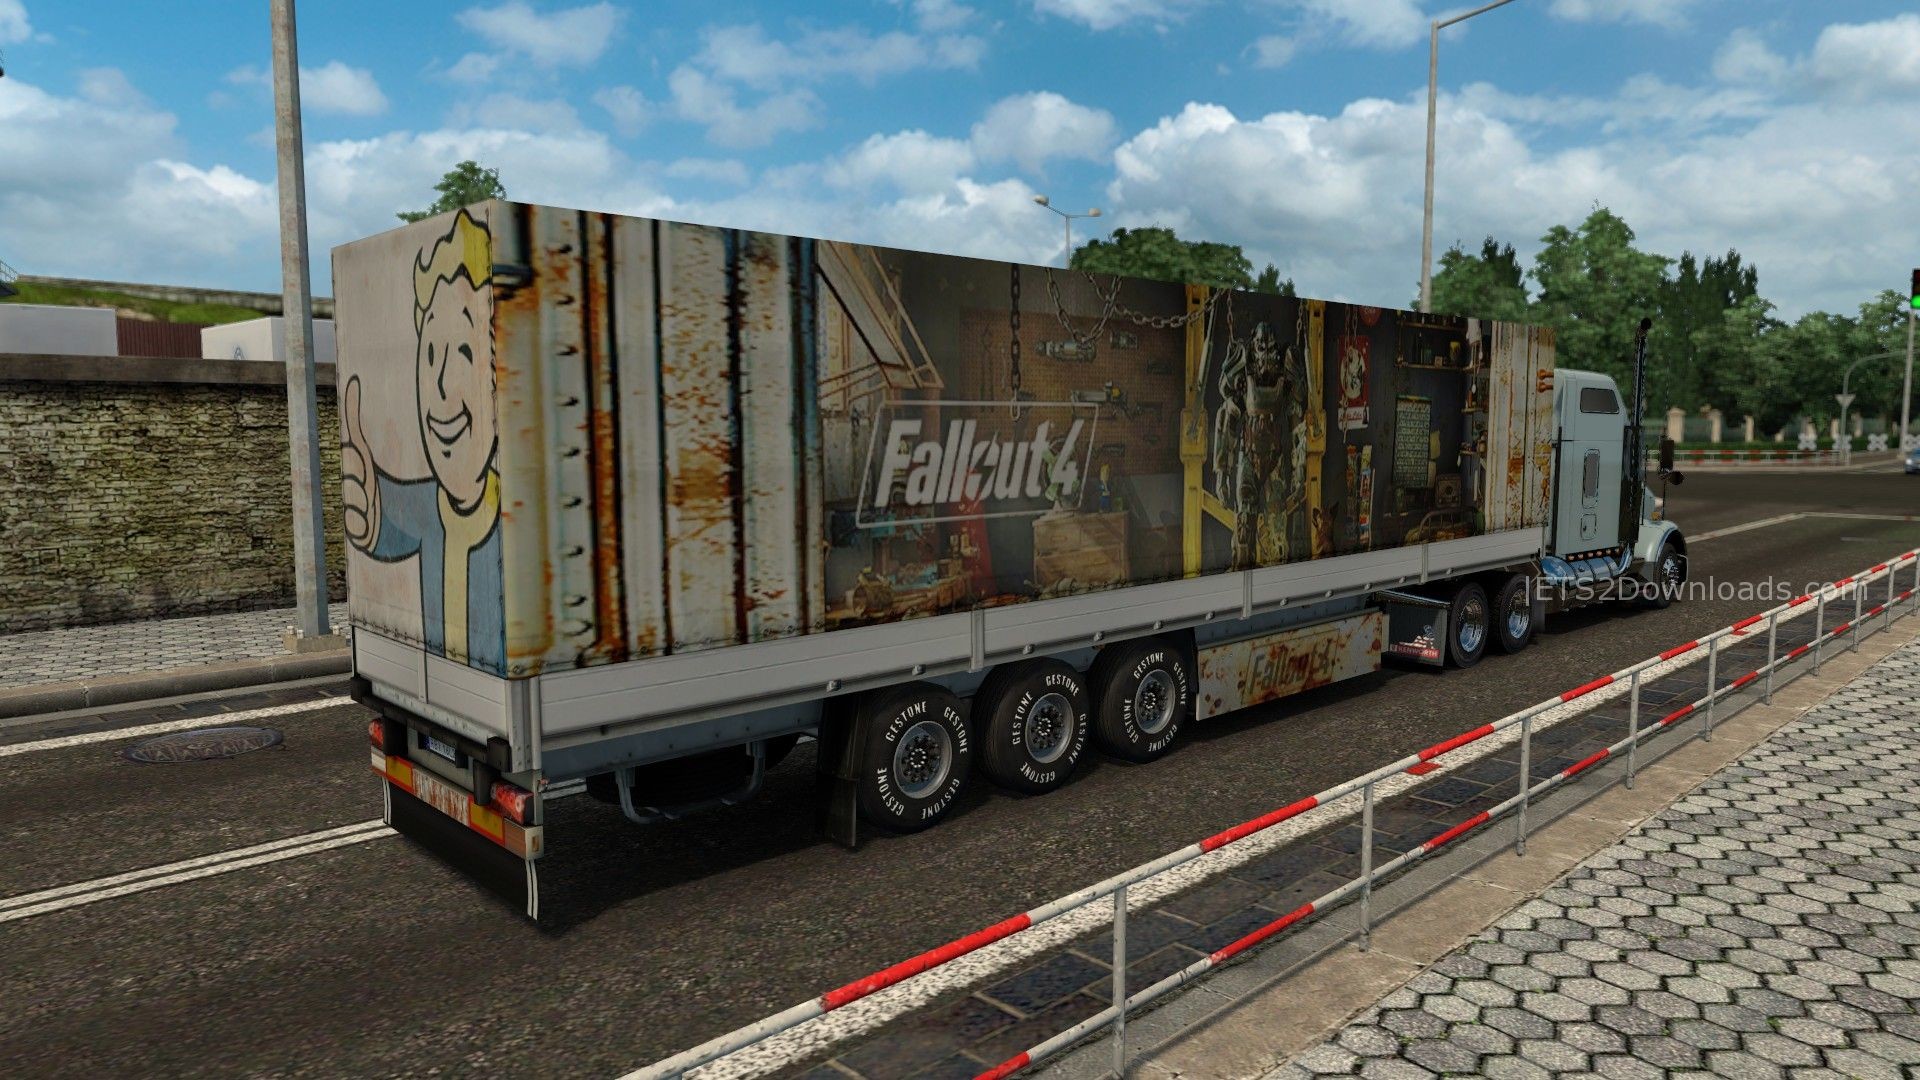 1920x1080 Download Fallout 4 Trailer for ETS 2: